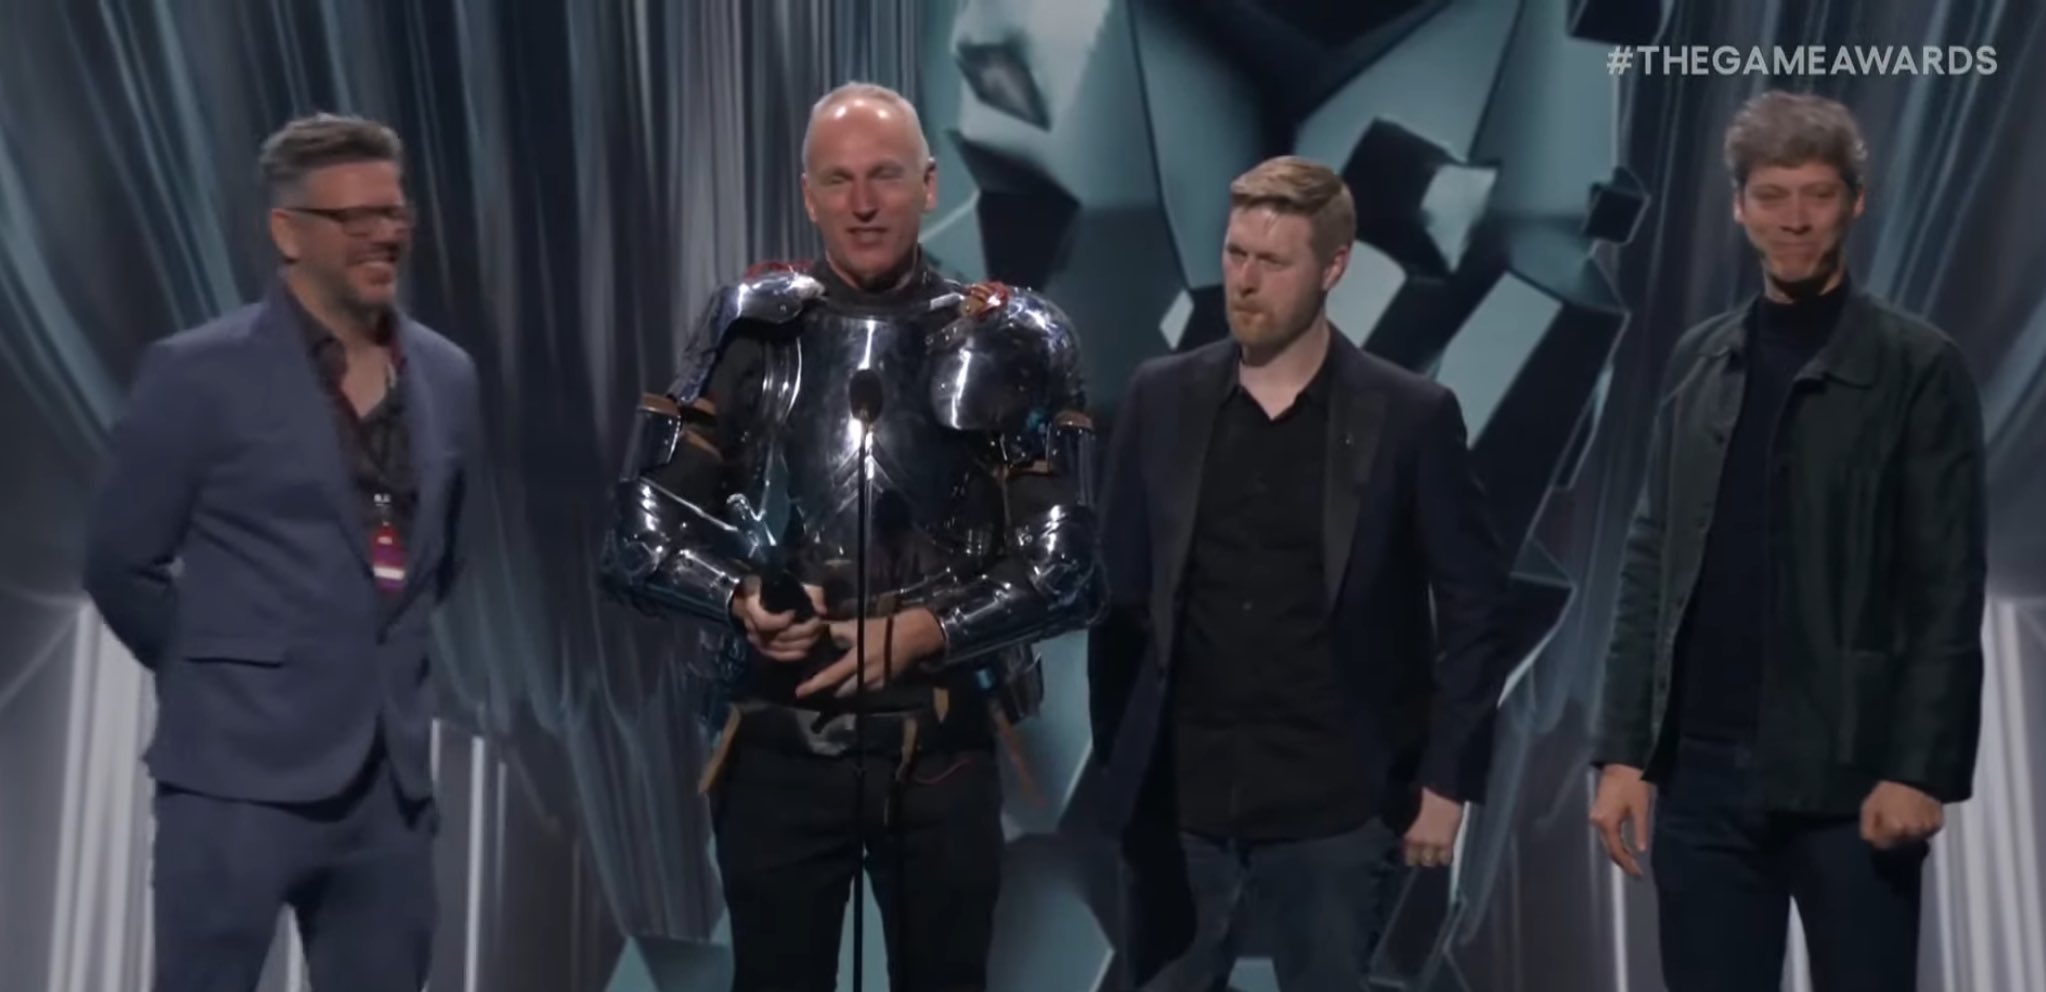 Baldur's Gate 3 wins Game of the Year at The Game Awards 2023